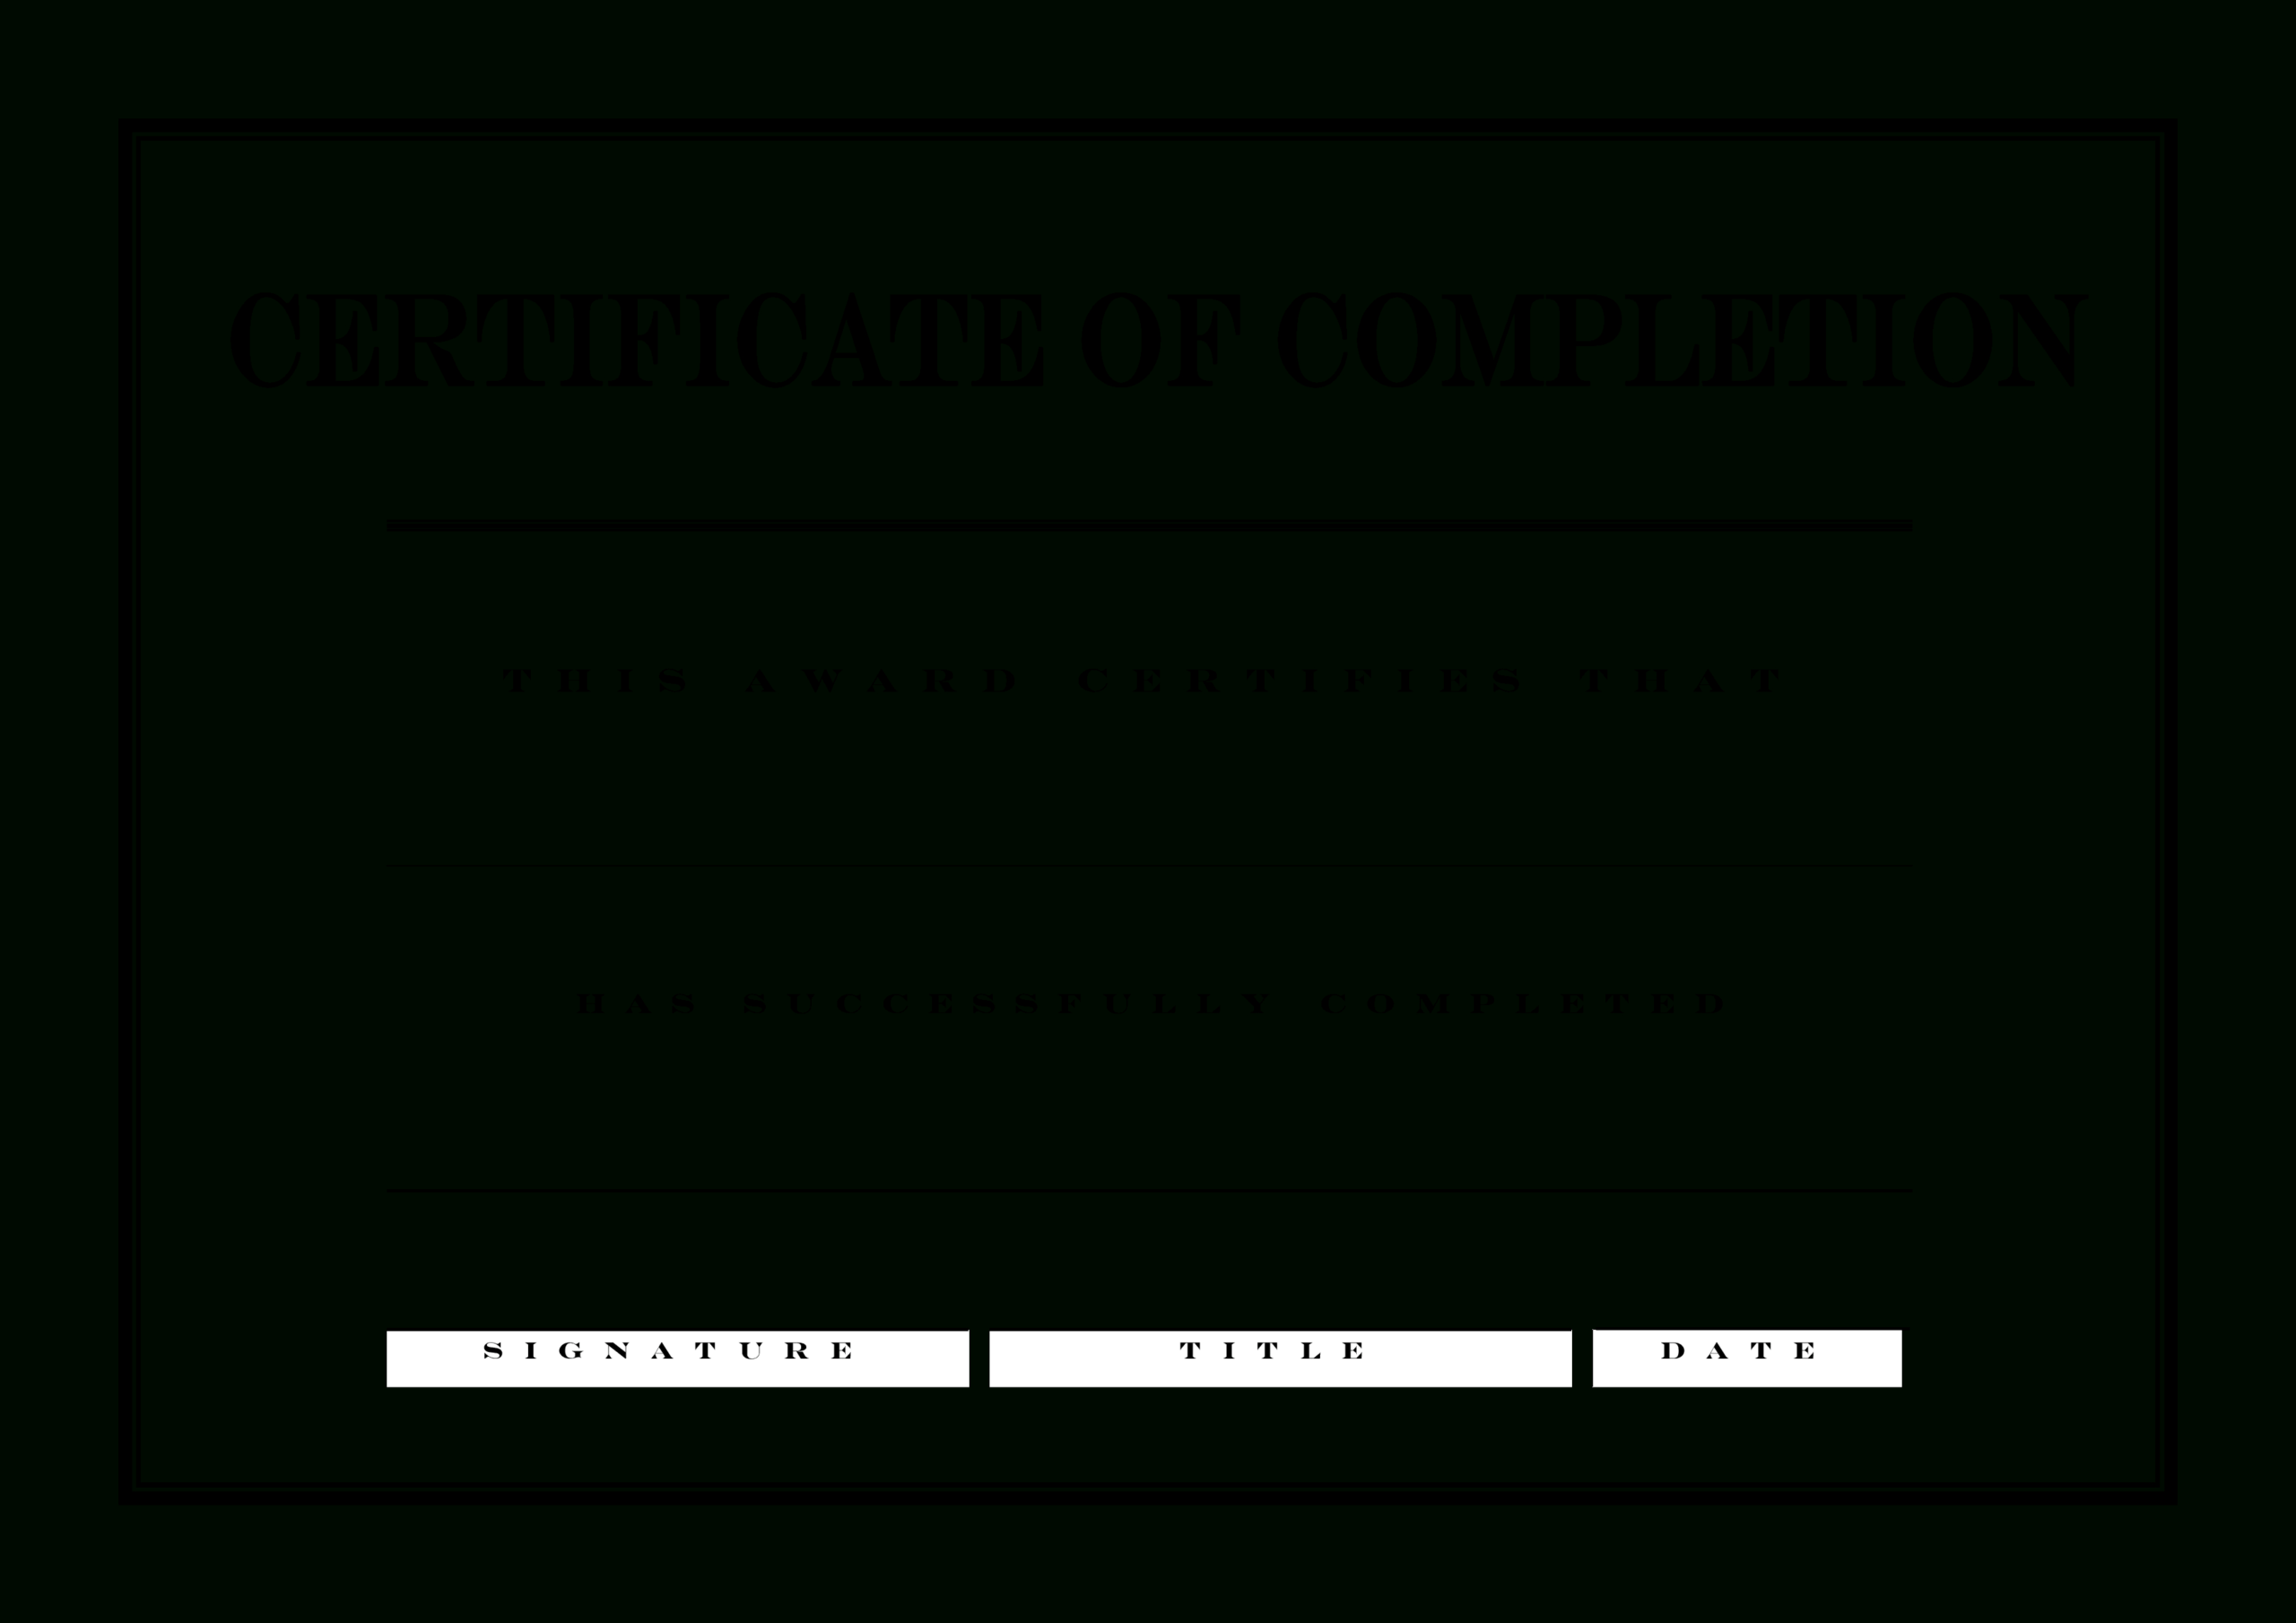 Certificate Of Completion | Templates At Allbusinesstemplates Inside Free Printable Certificate Of Achievement Template